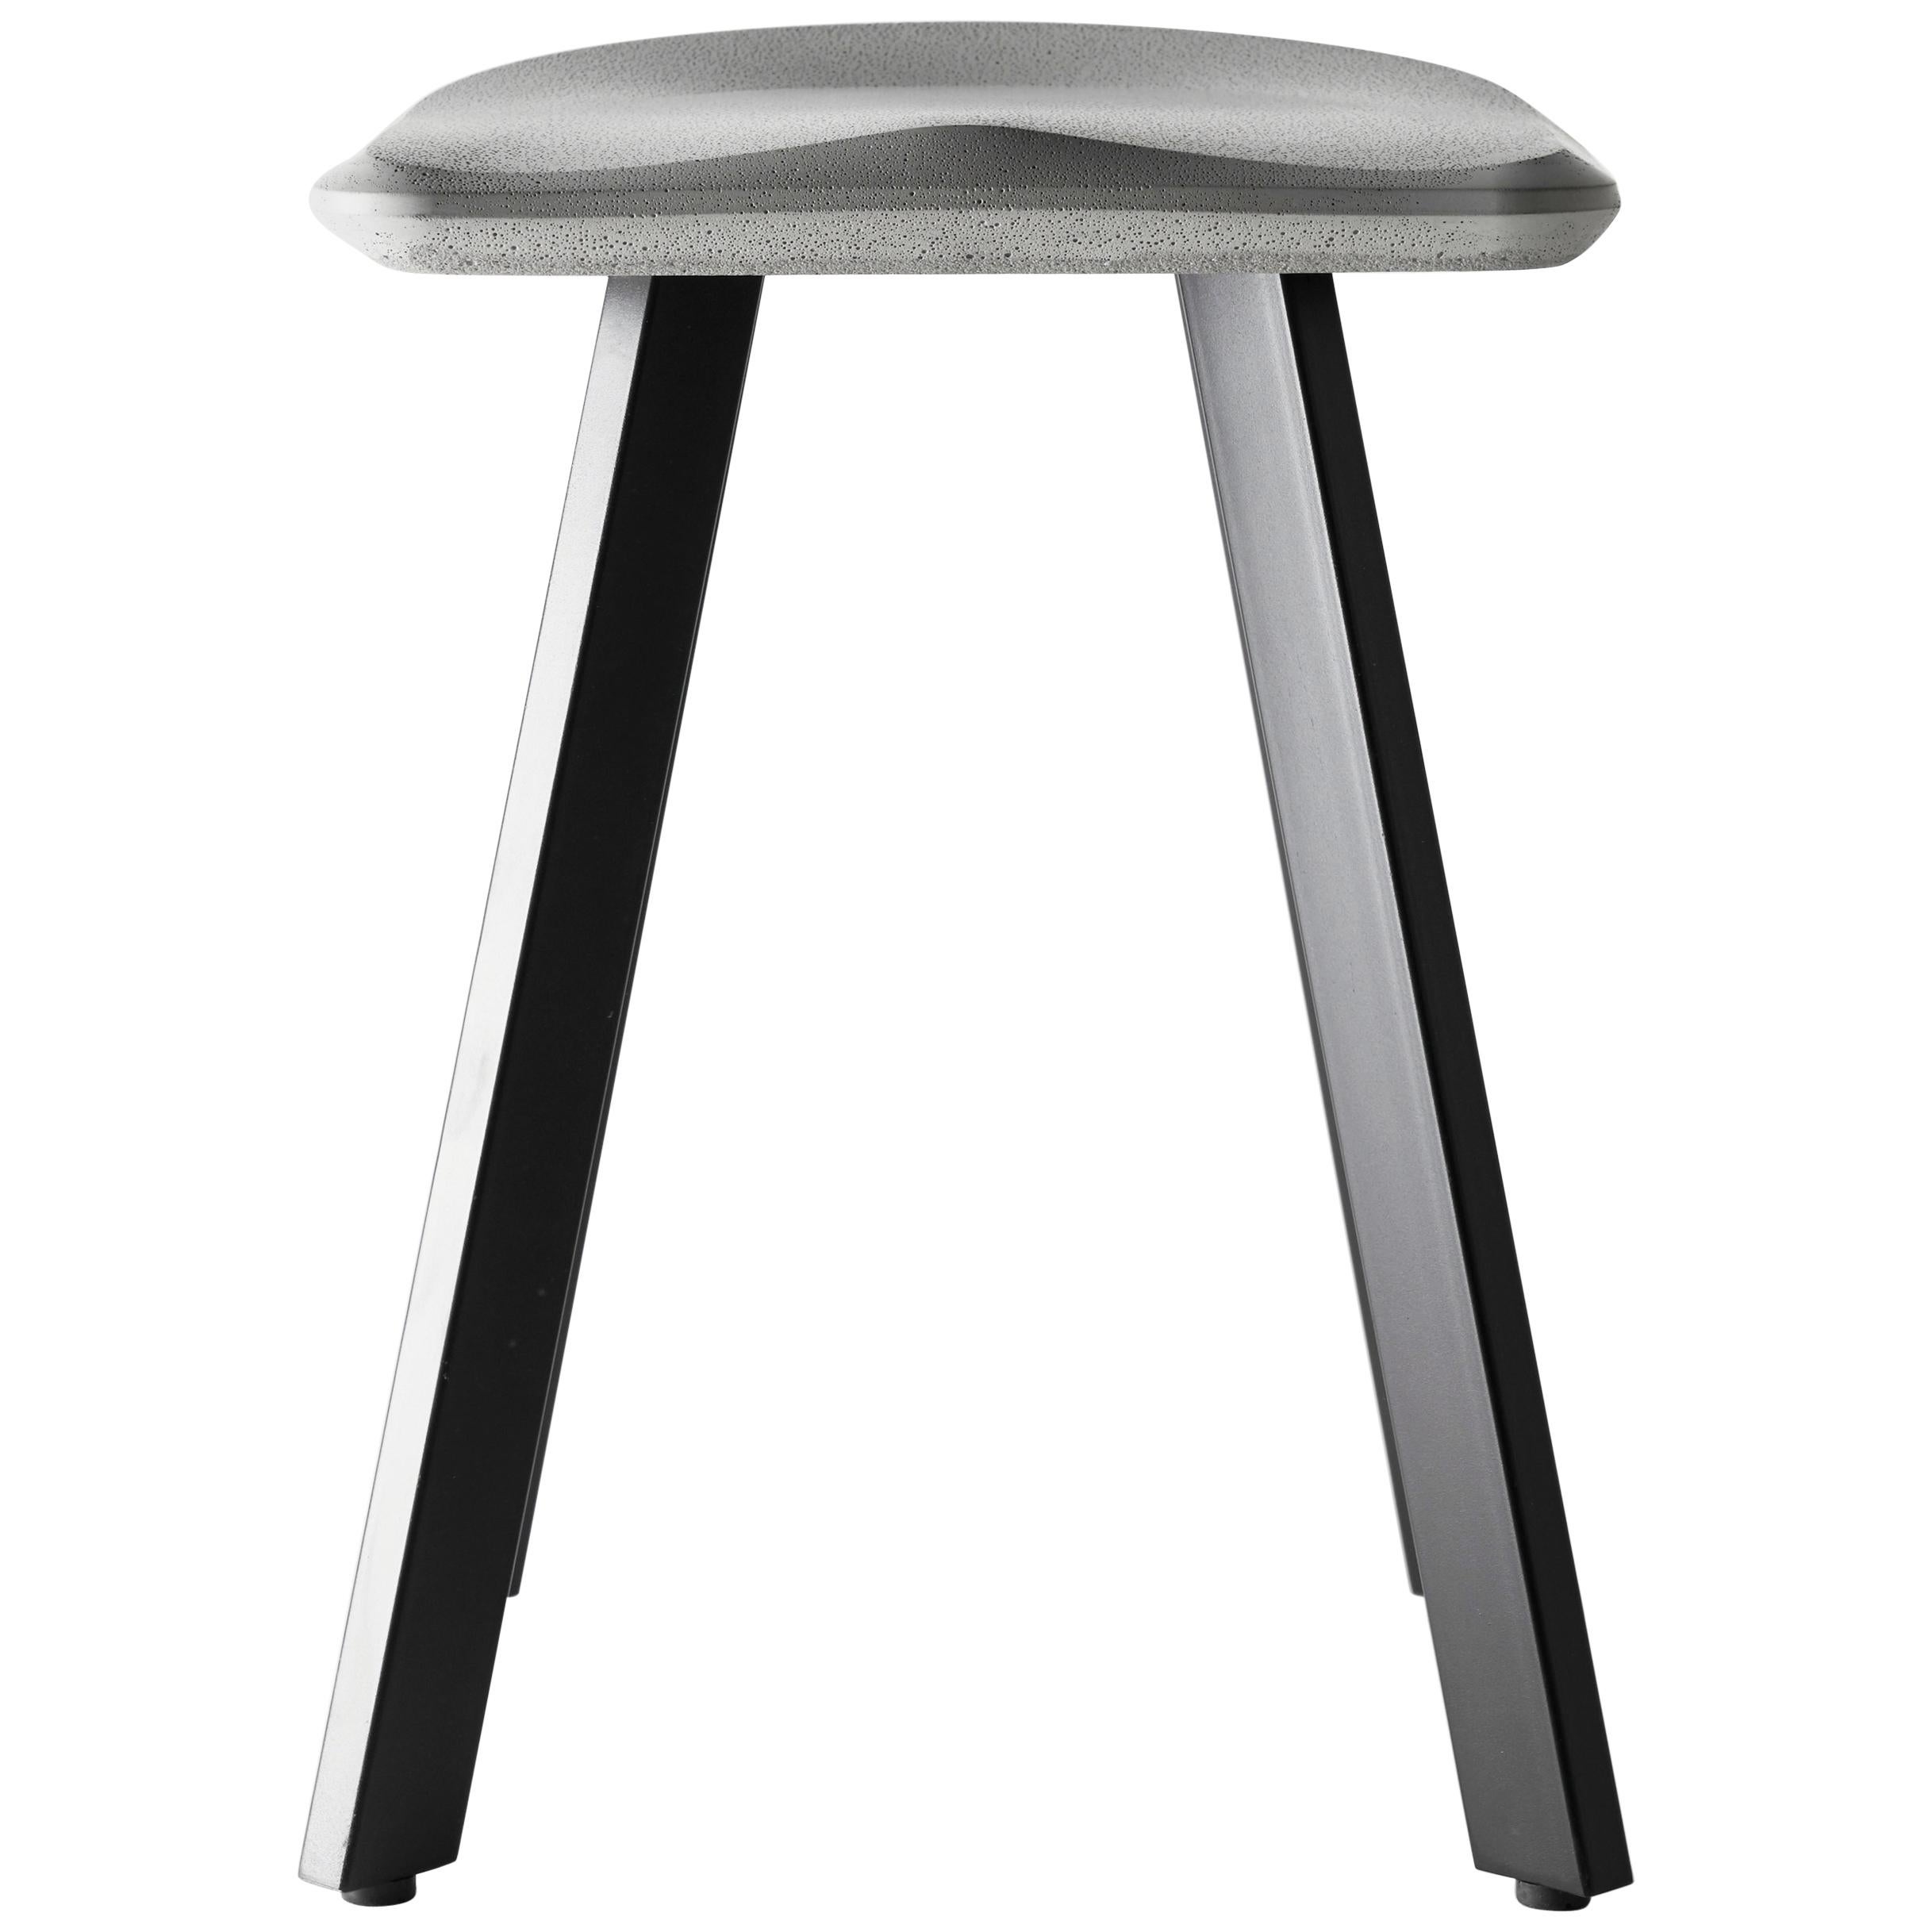 Concrete and Powder-Coated Steel Bar Stool, “A, ” from Concrete Collection